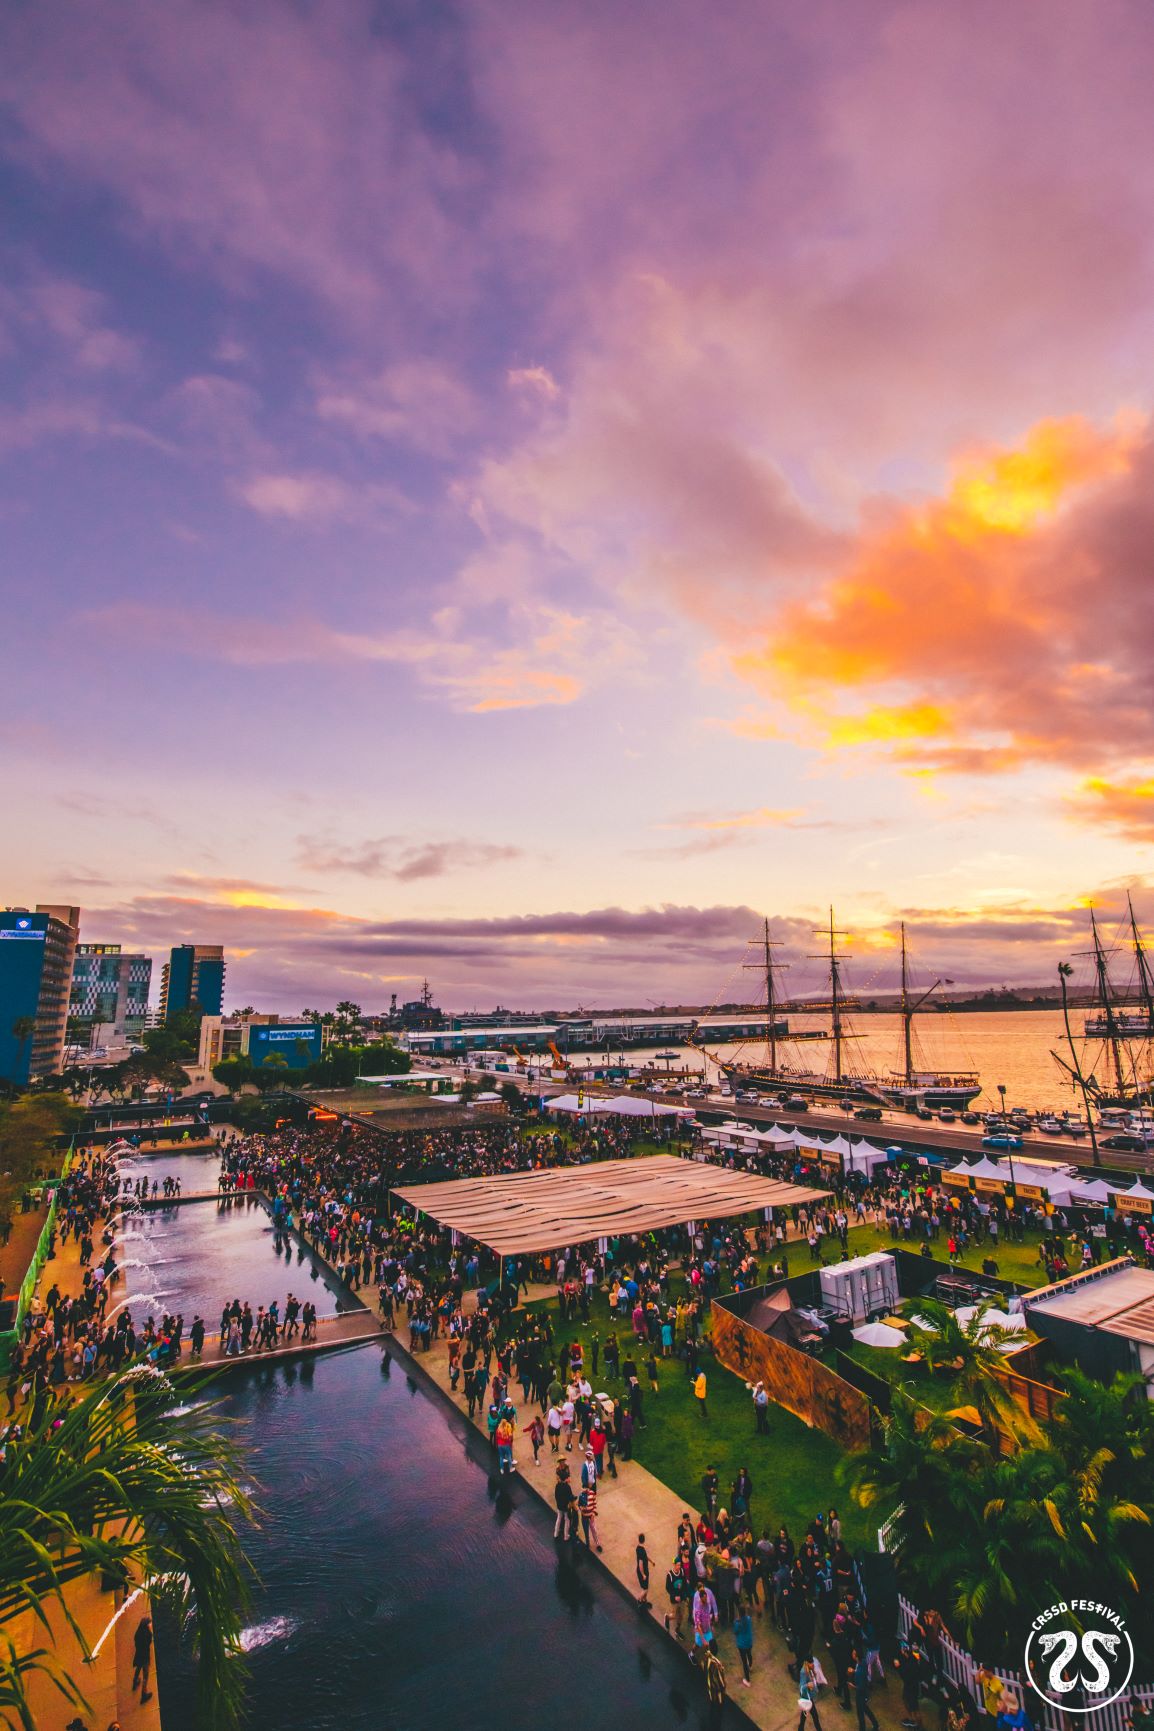 CRSSD Festival at Waterfront Park